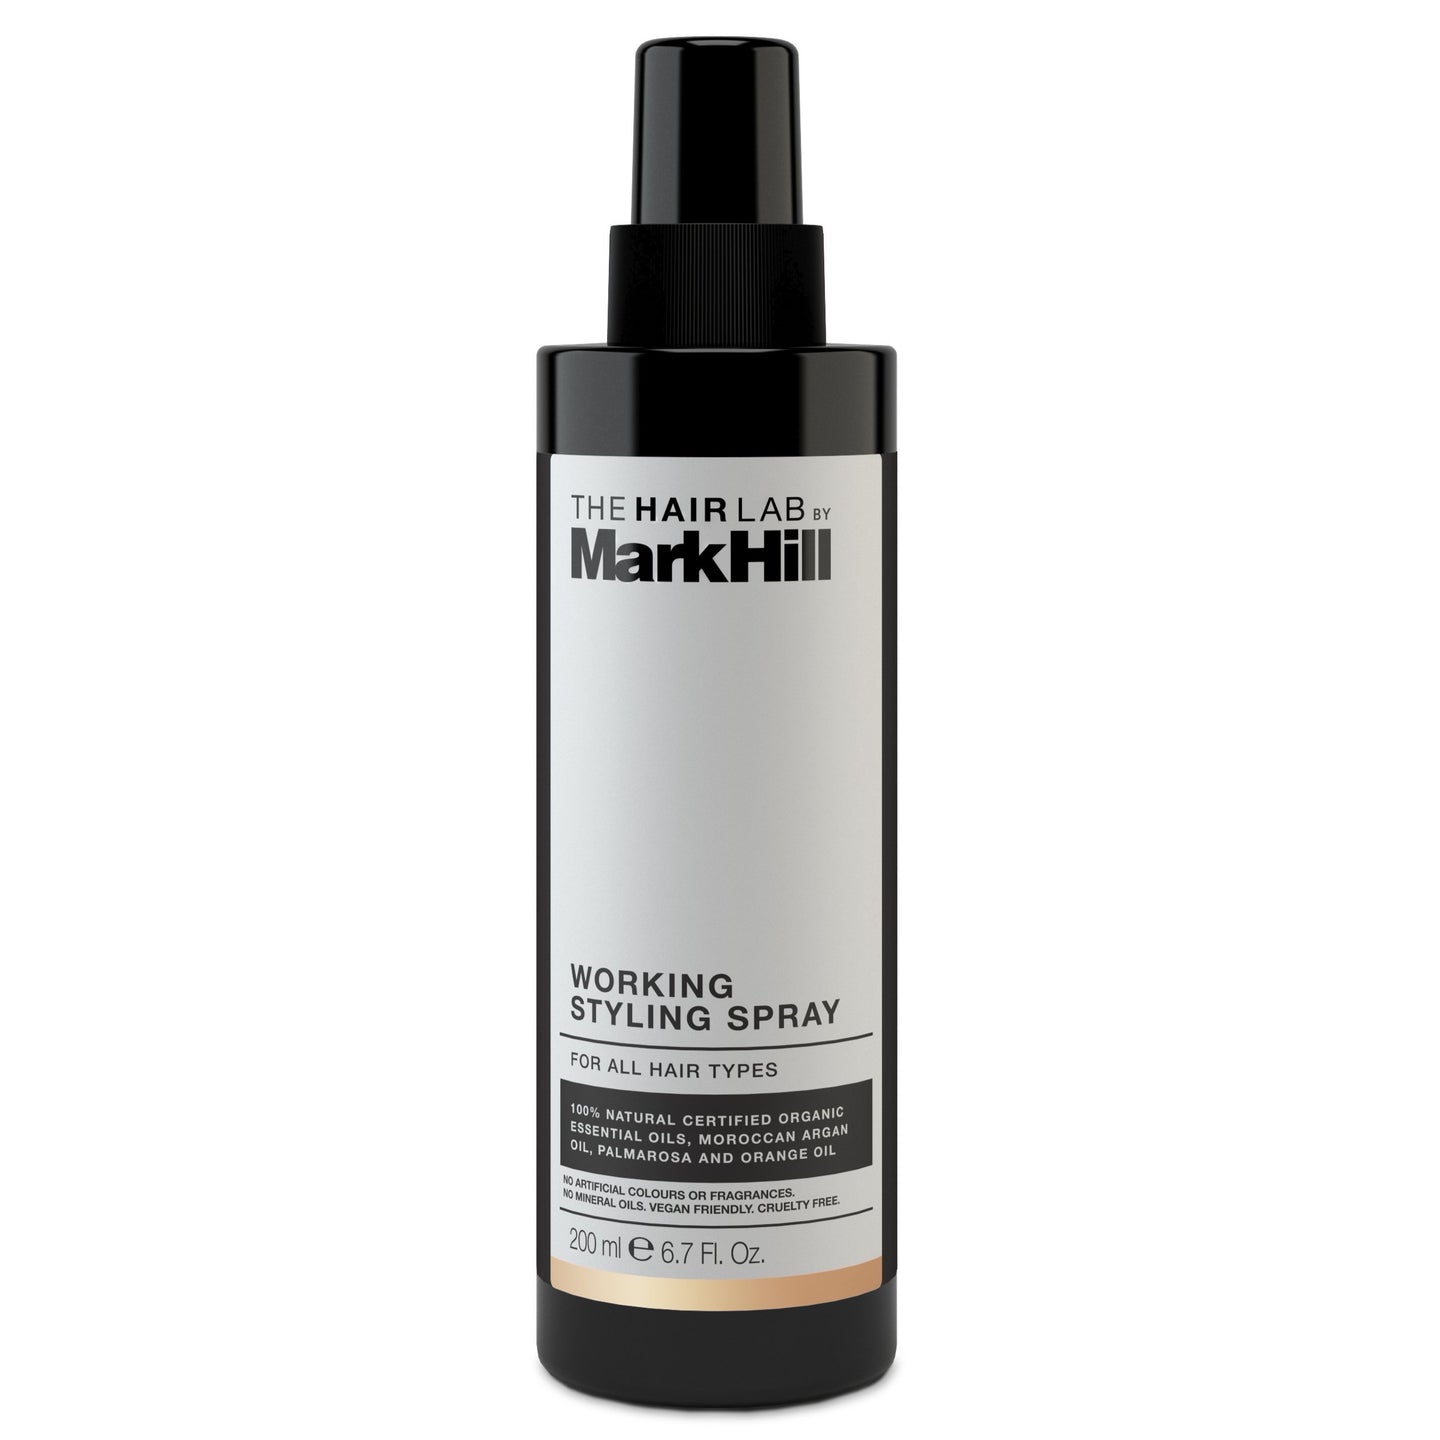 The Hair Lab by Mark Hill Working Styling Spray 200ml